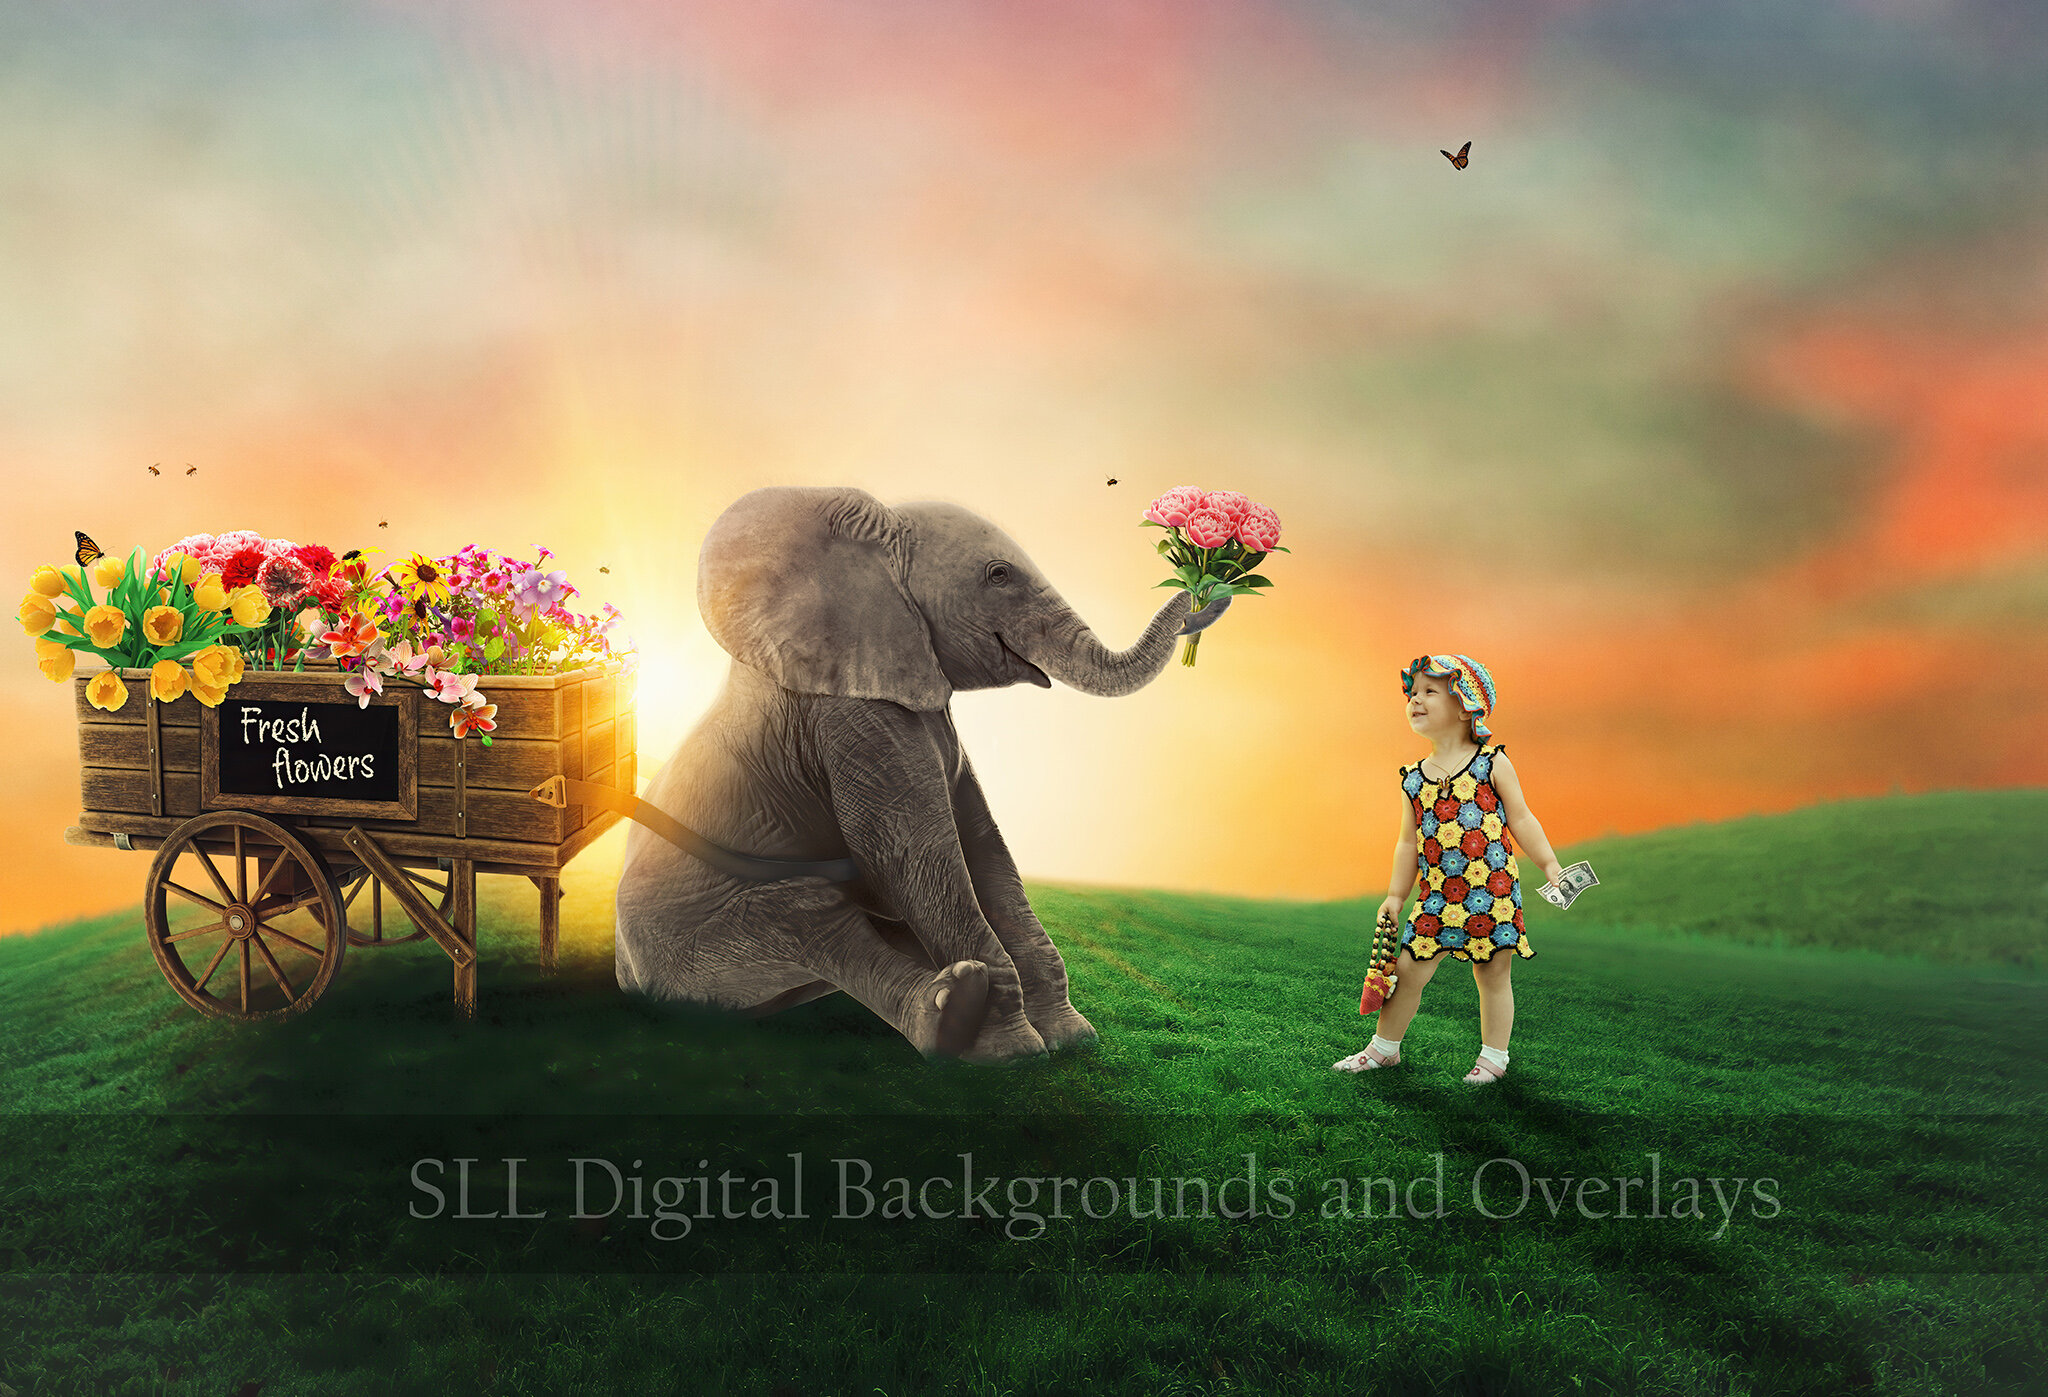 charming landscape with tree with elephant flowercart model logo.jpg